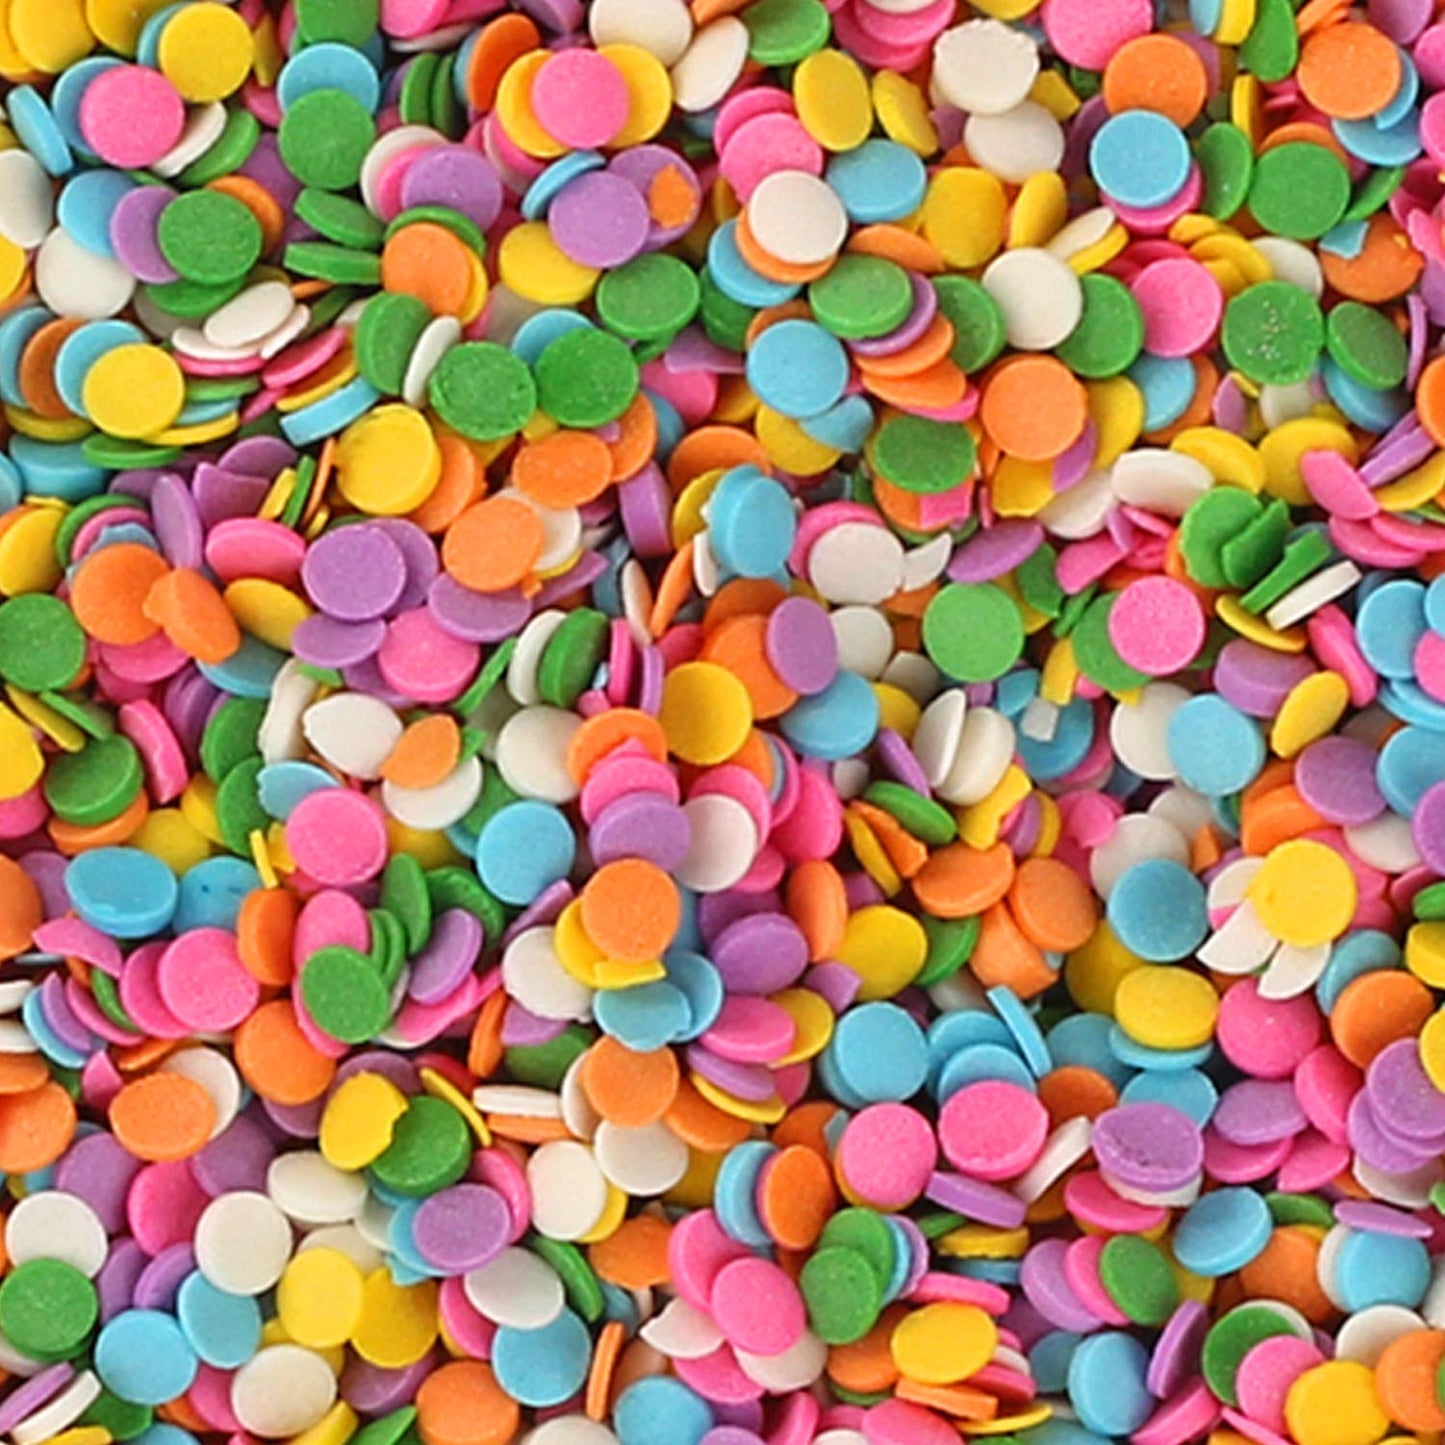 Pastel Confetti Sprinkles - Mother's Day Sprinkle Confetti - 10 ounces - Candy Toppings for Cupcakes - Cake Decorations - Ice Cream Toppings